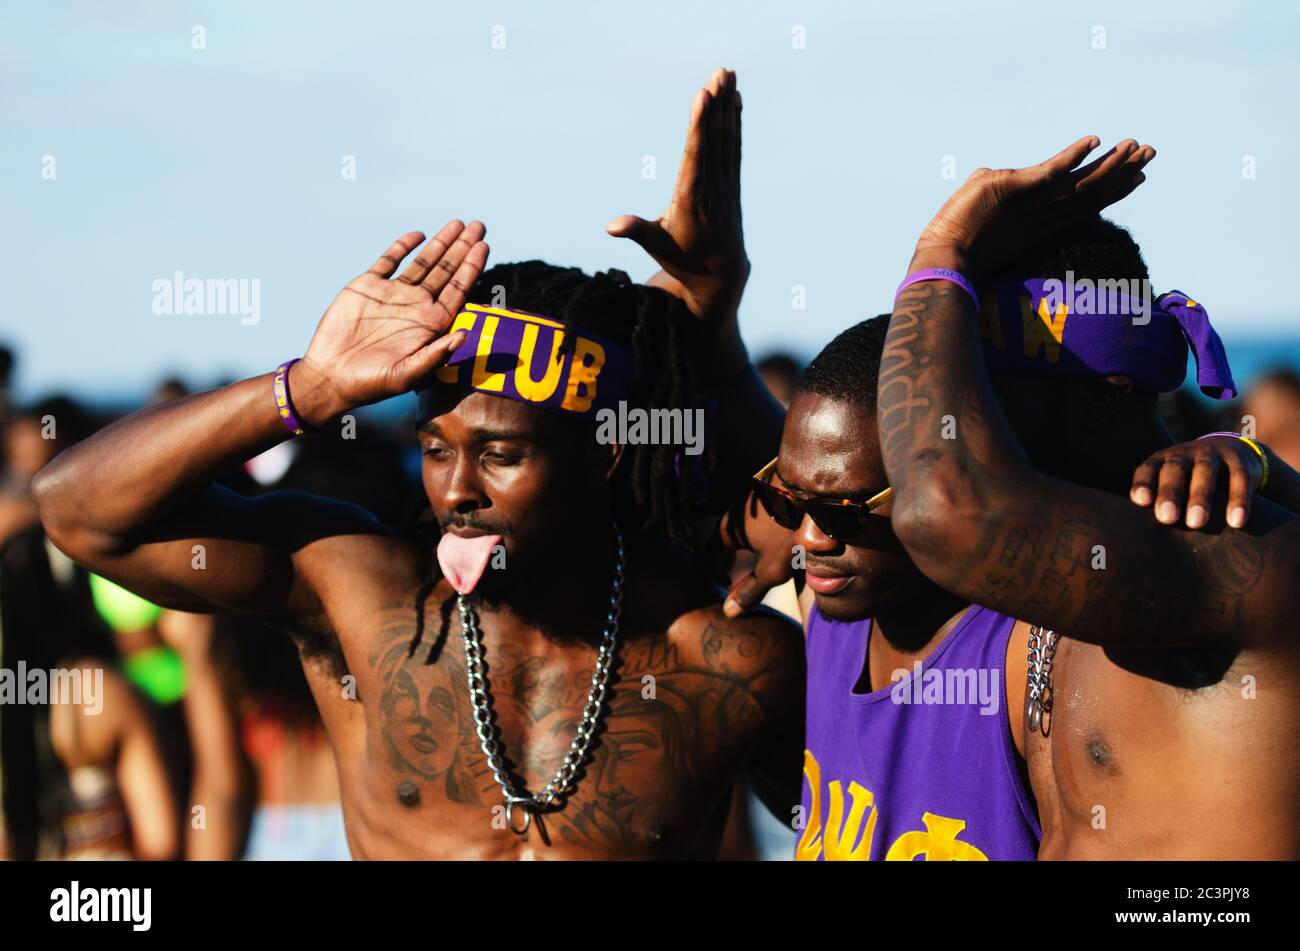 miami march 23 2019 young men from the omega psi phi fraternity pose for a photograph at a spring break party on south beach 2C3PJY8